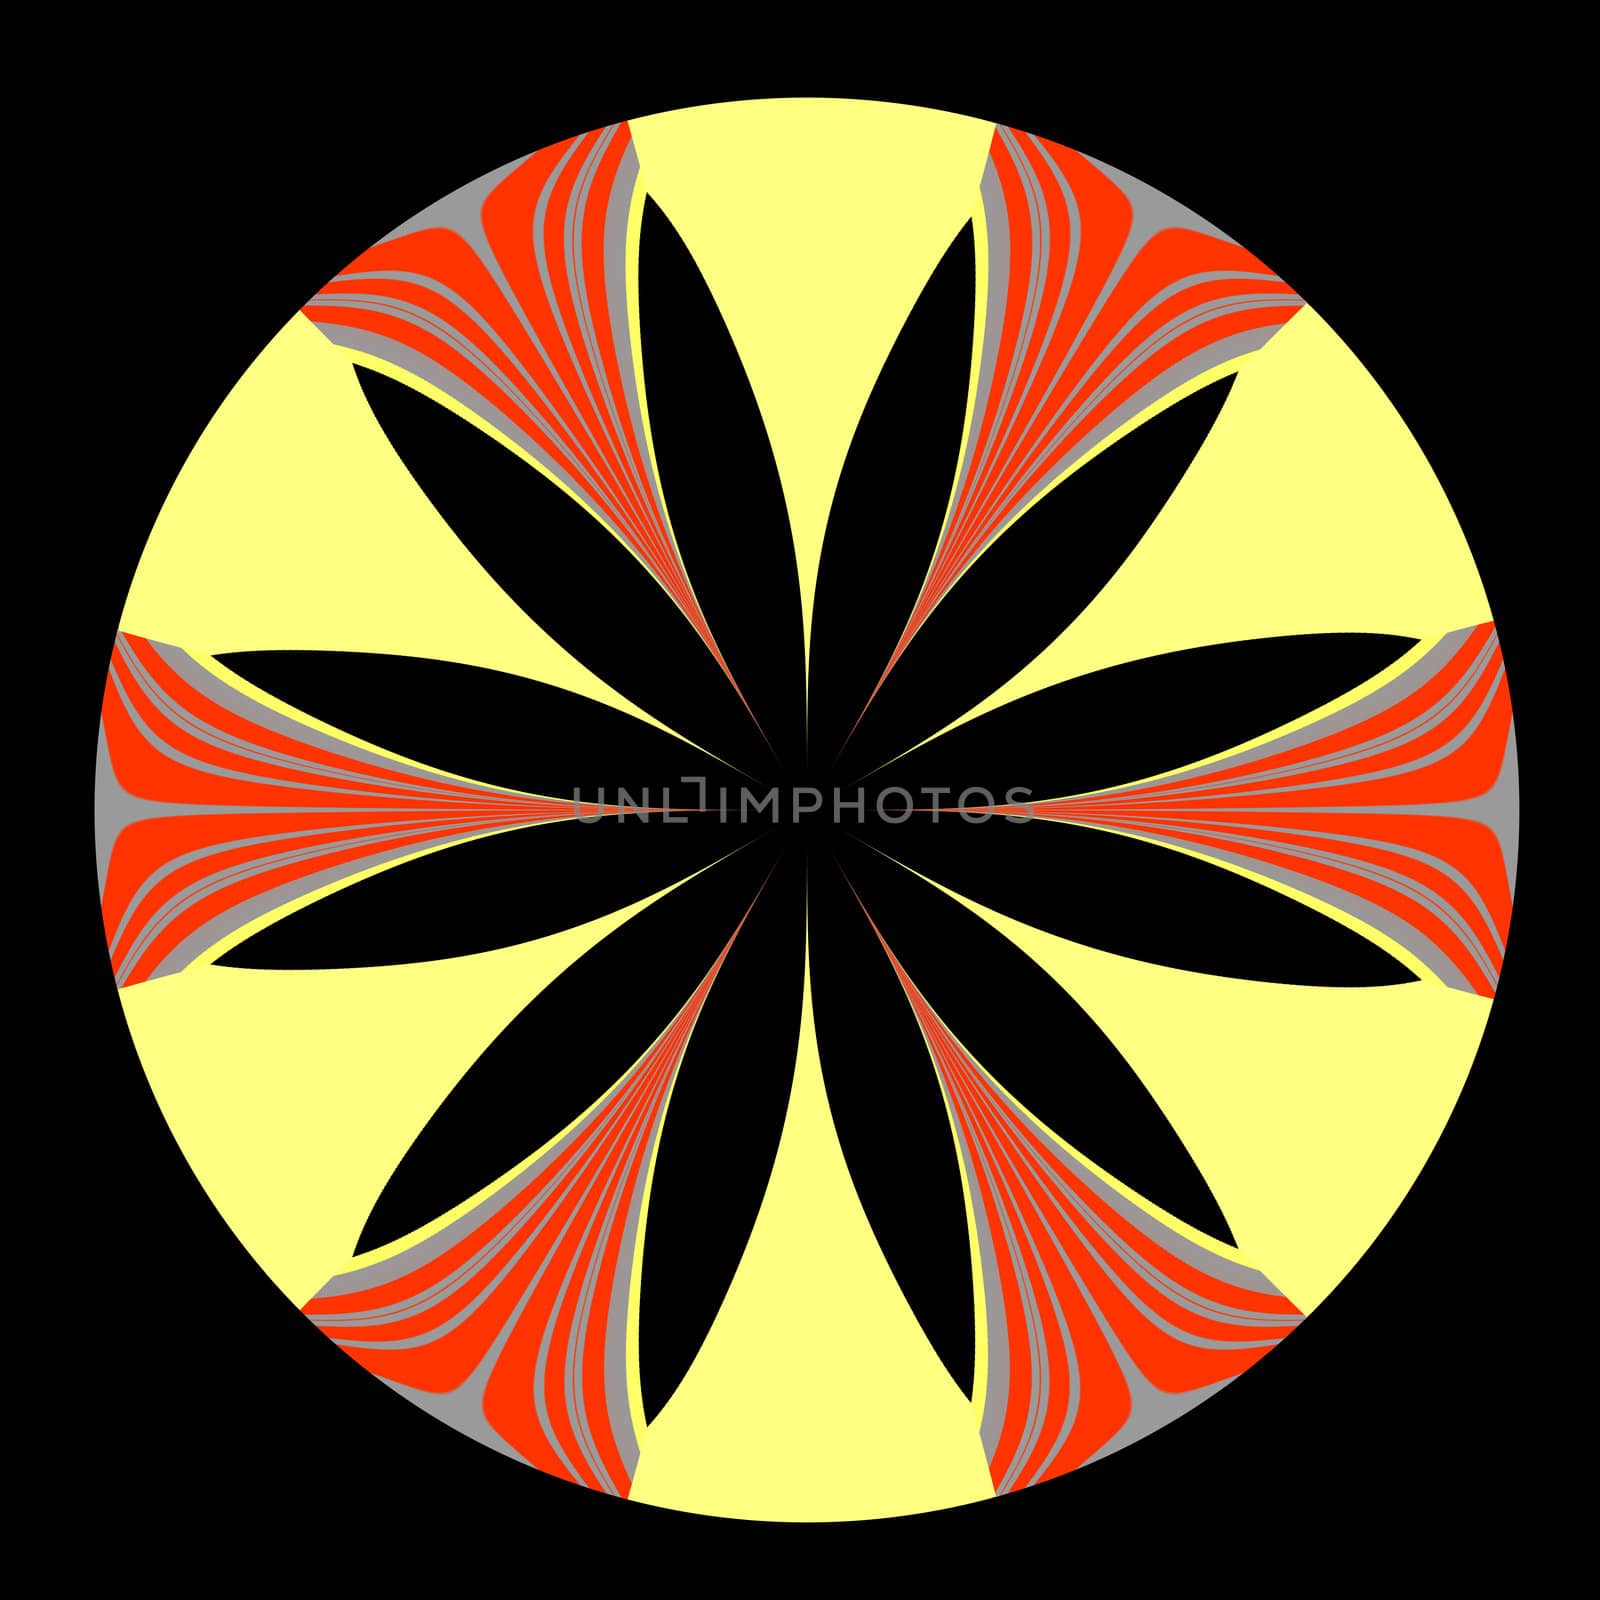 A floral abstract done in shades of yellow, red, and gray on a black background.